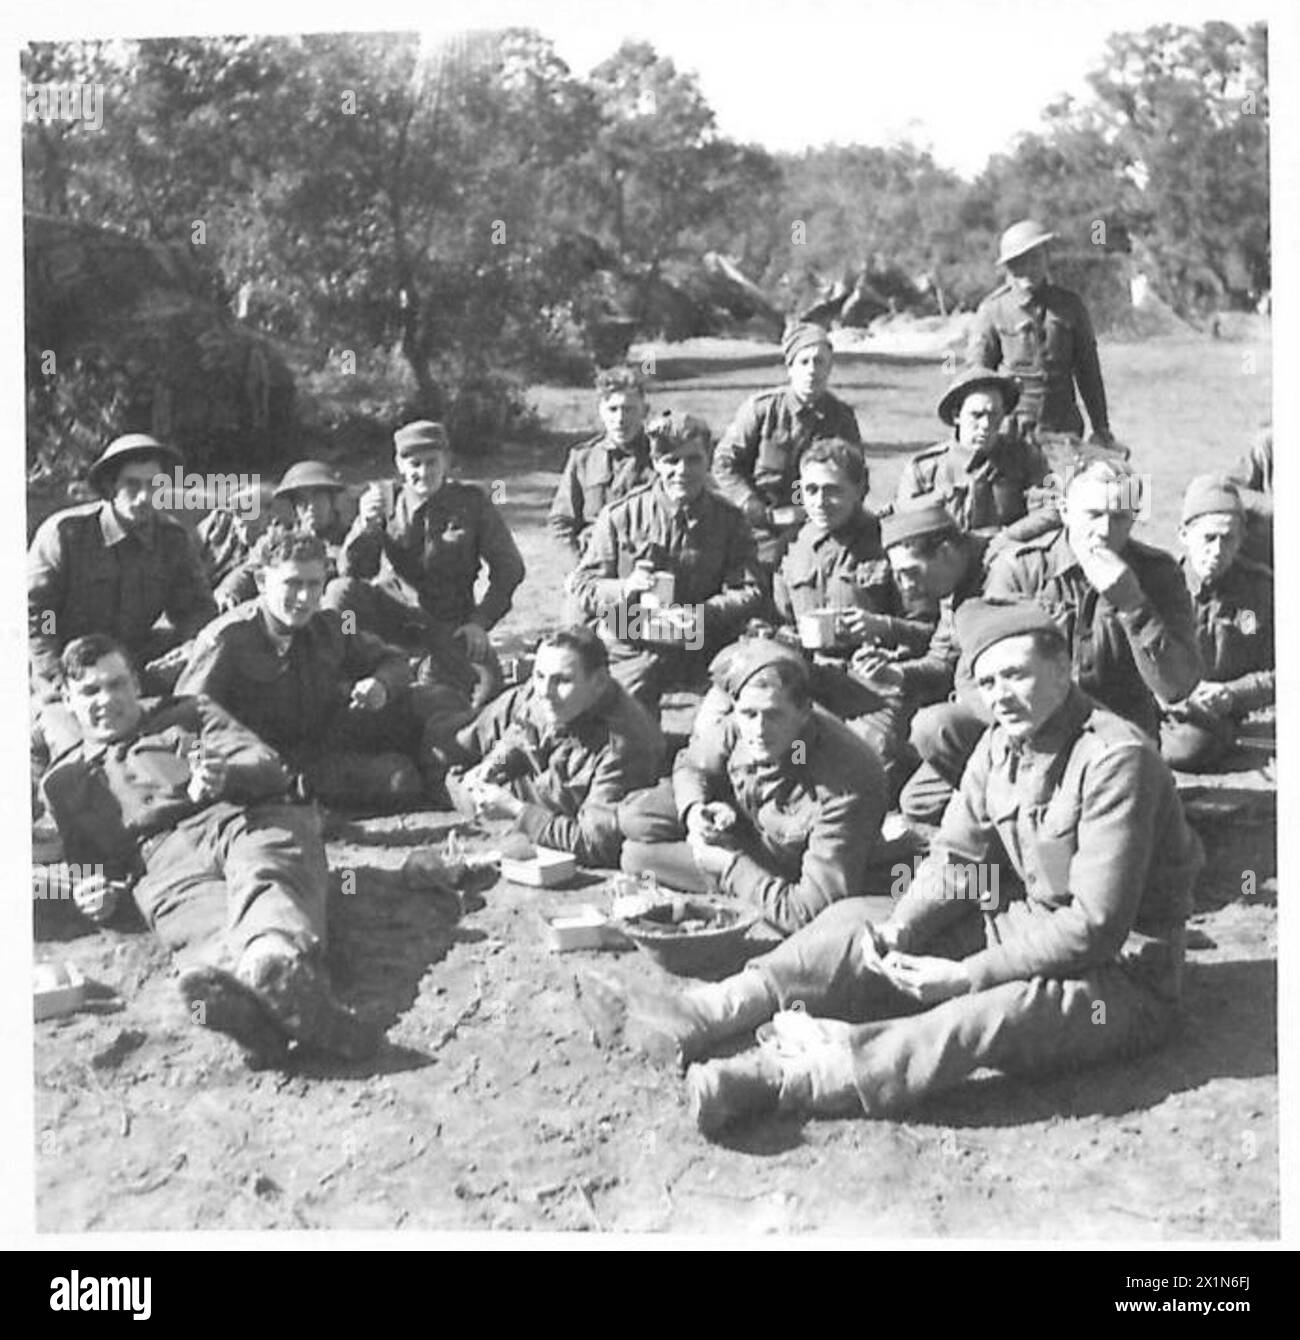 ITALY : FIFTH ARMYANZIO BRIDGEHEADSALUTE THE SOLDIER SERIES - Lunch time at 1st Bn. Duke of Wellington Regiment's camp, British Army Stock Photo